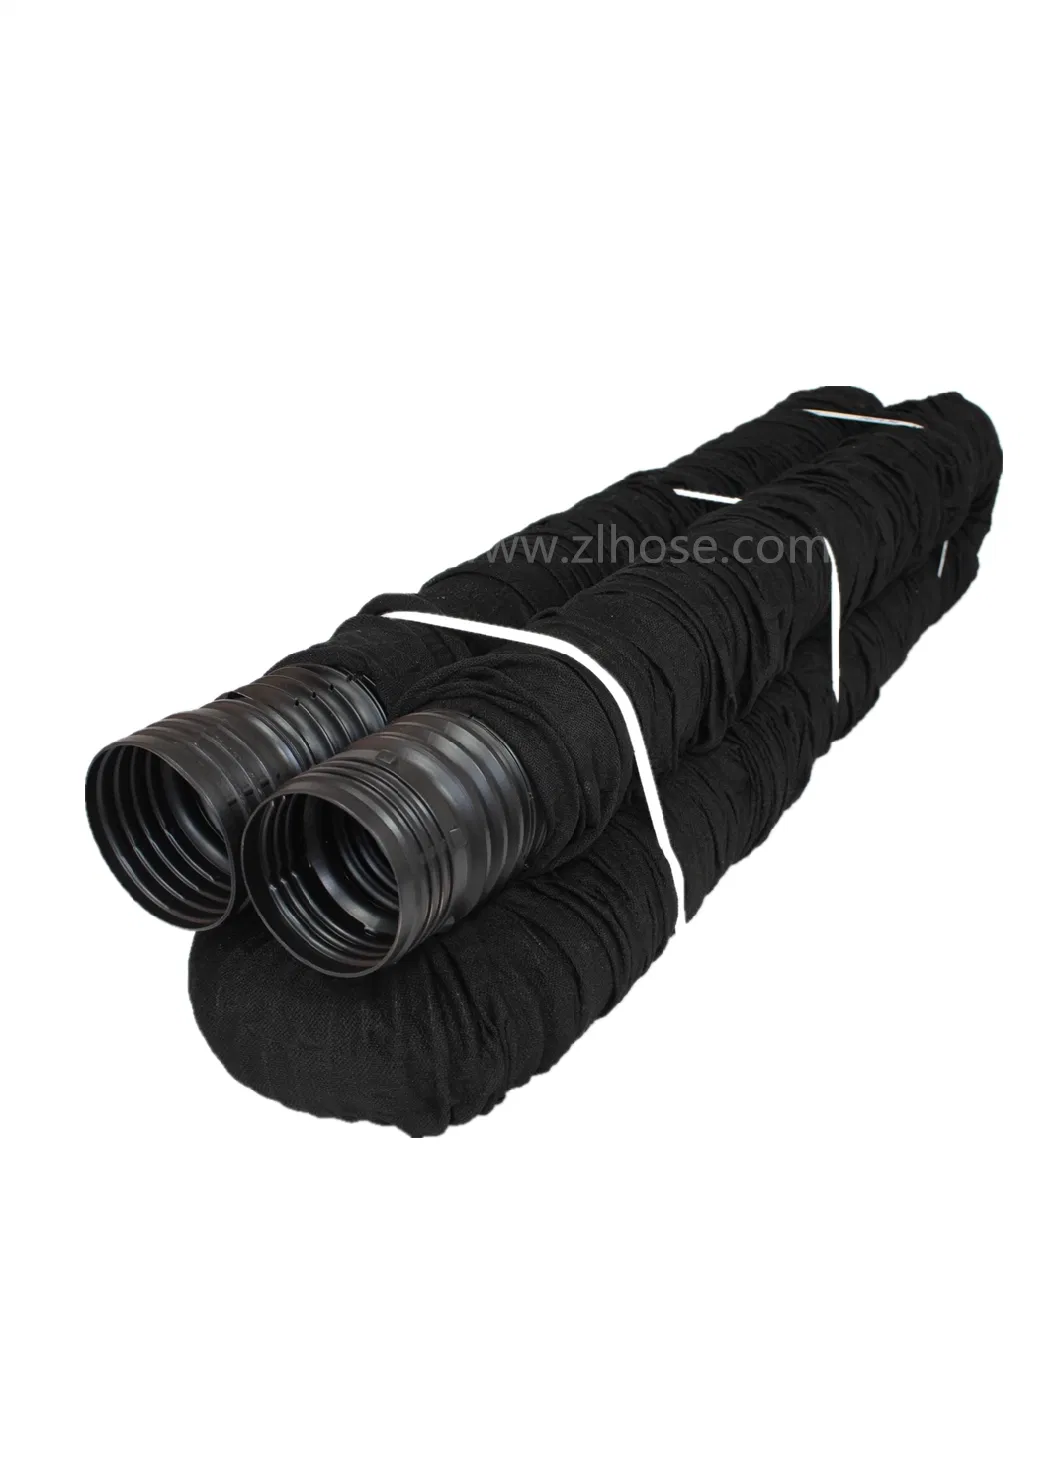 Pipe&Hose / HDPE Pipe / HDPE Pipe Manufacturer